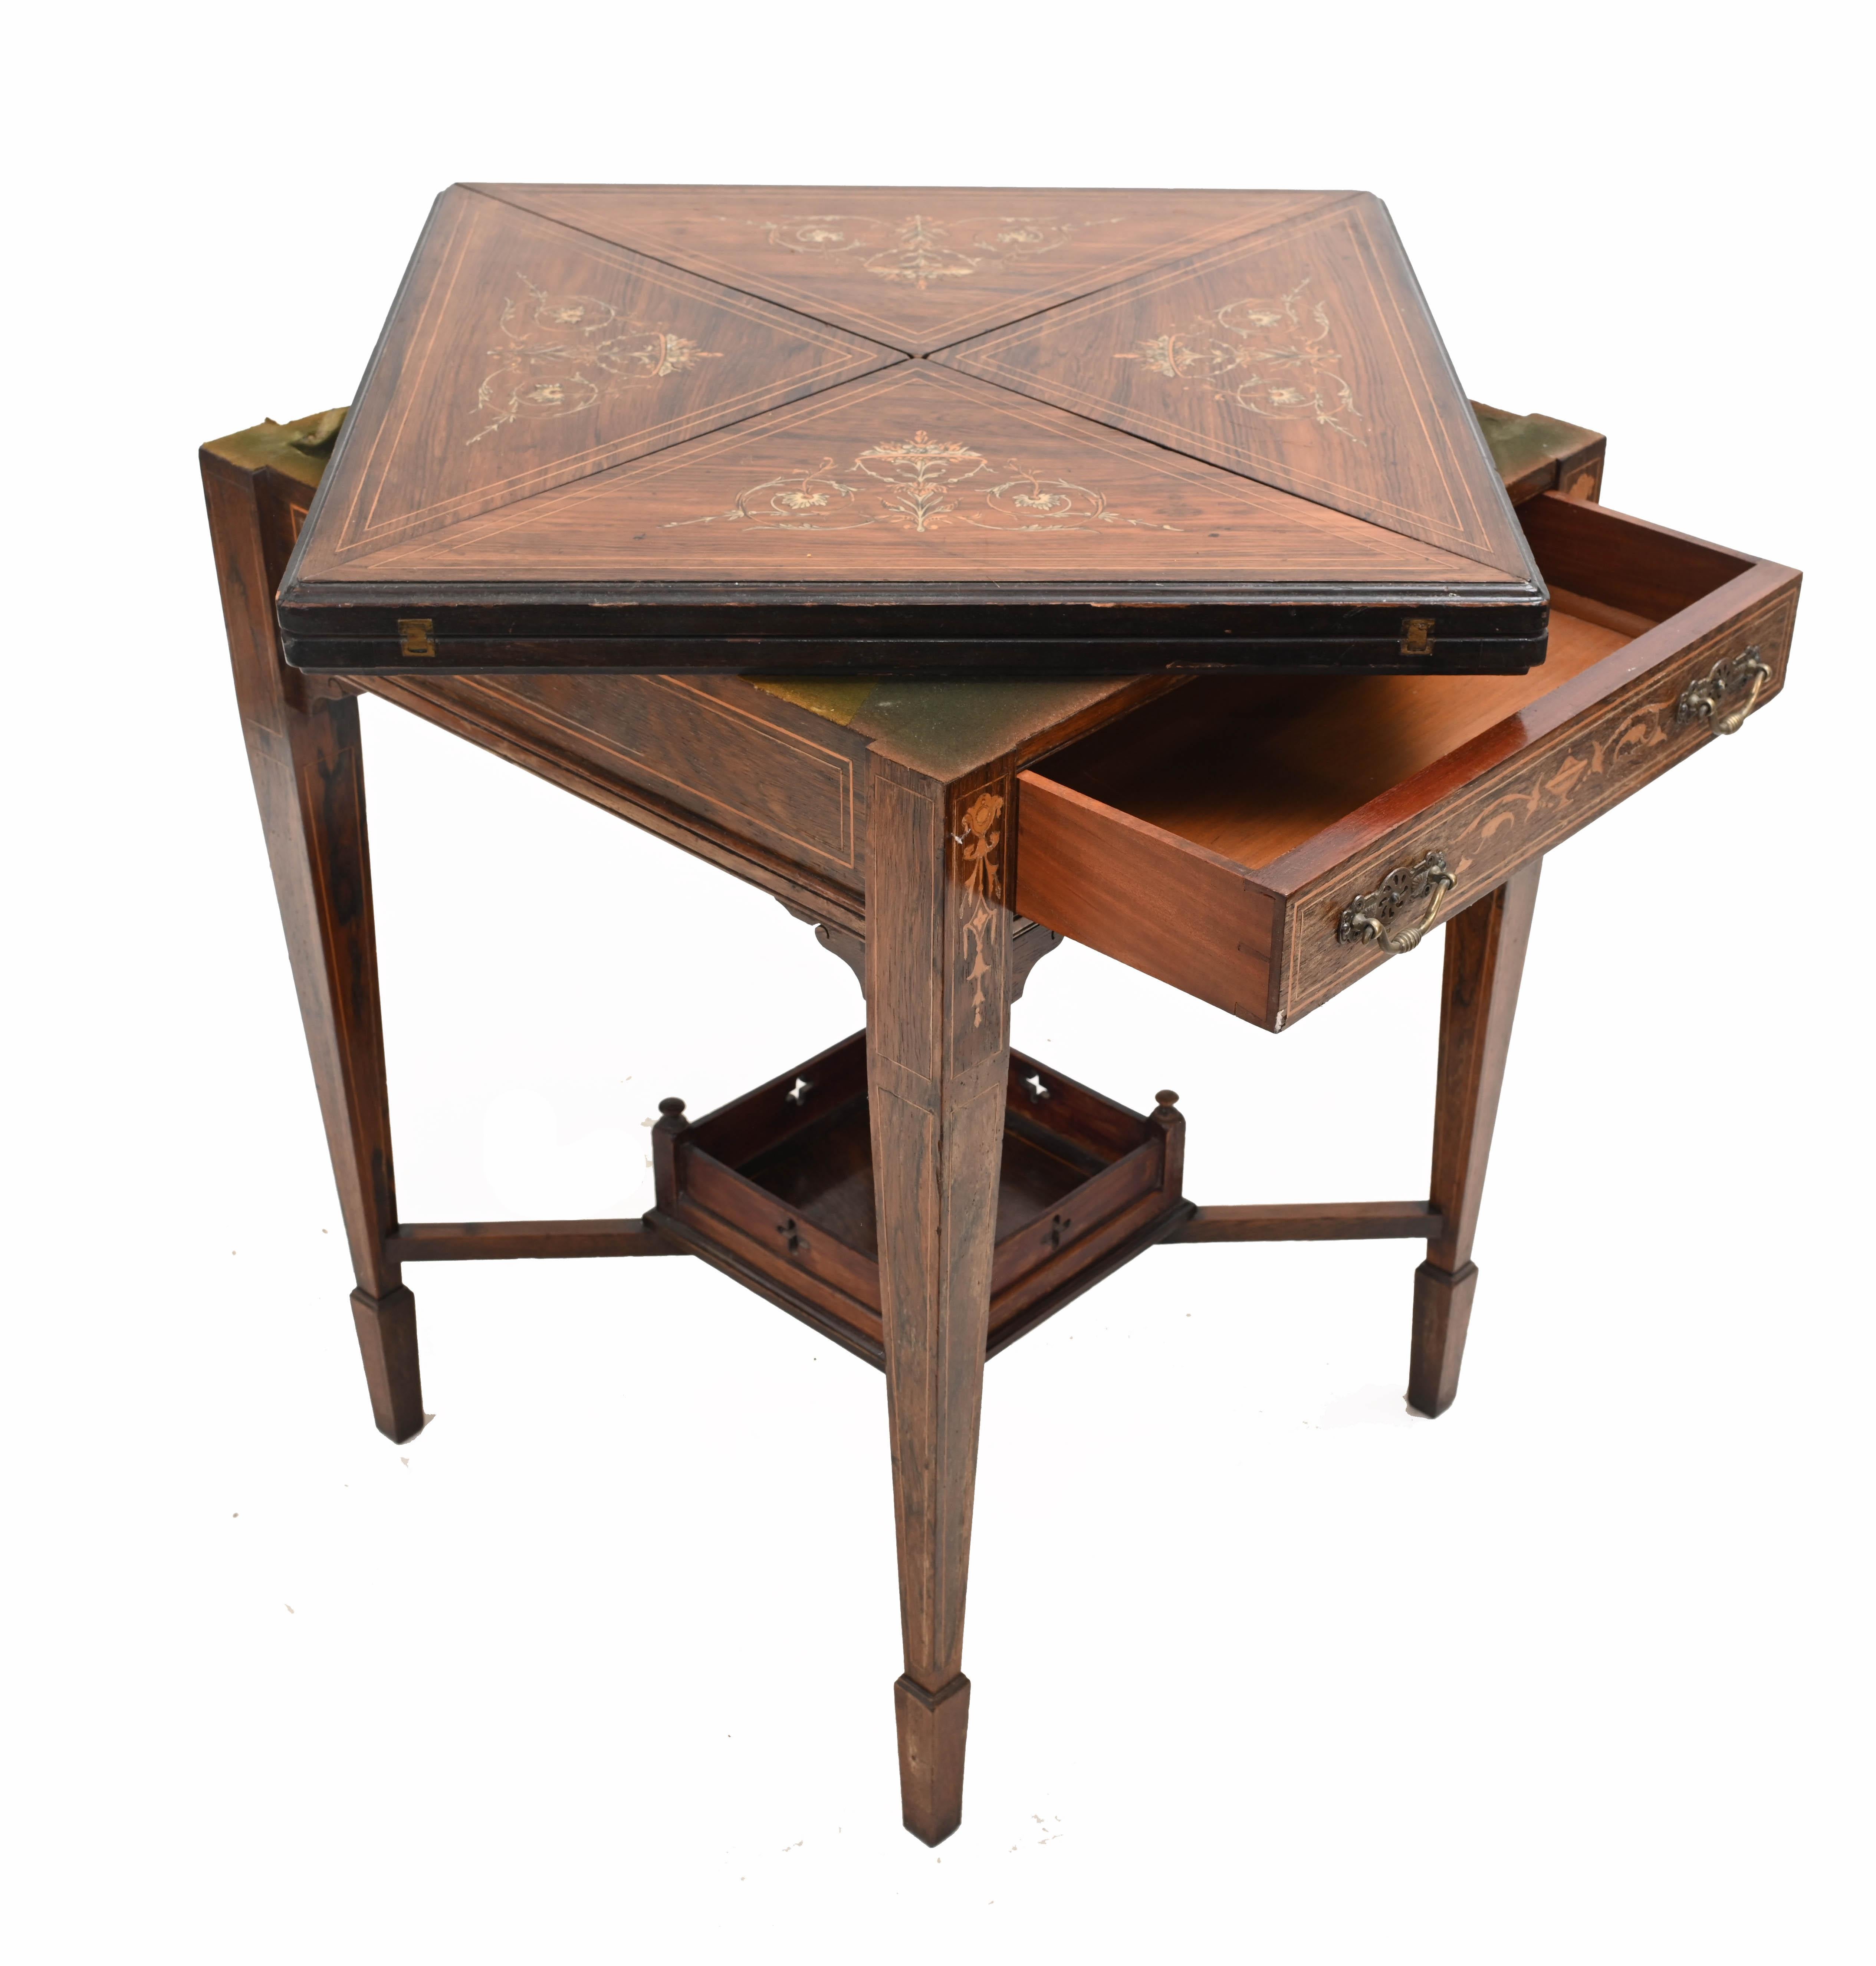 Refined Edwardian games table
Also called an envelope table due to the manner in which it opens out
Hand crafted from rosewood with intricate inlay work
Opens out to reveal game playing surface
Circa 1910
Some of our items are in storage so